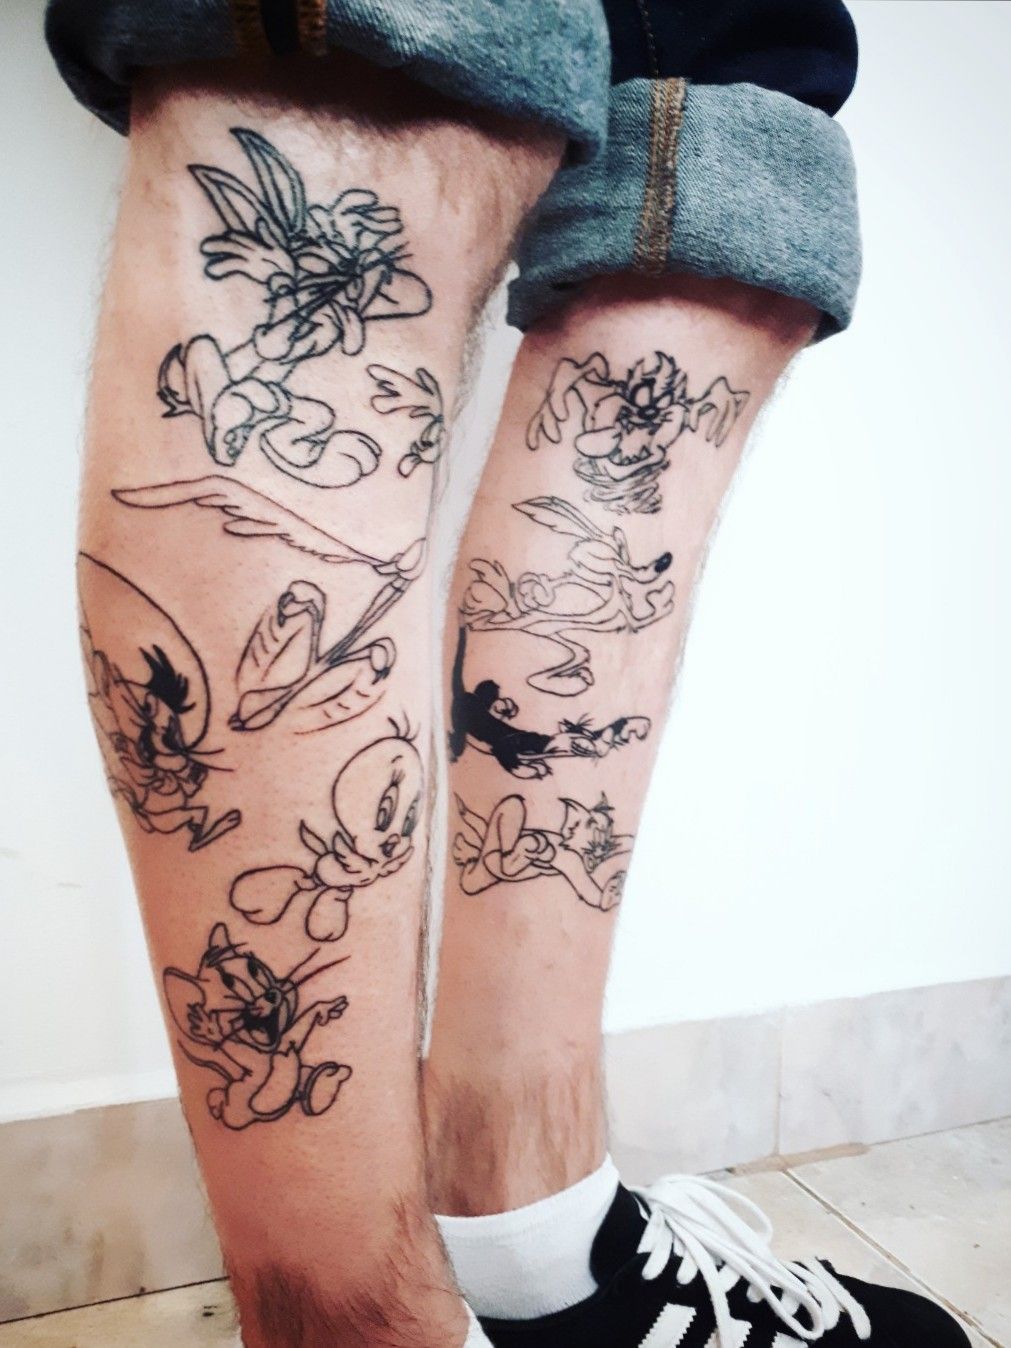 101 Amazing Looney Tunes Tattoo Ideas That Will Blow Your Mind  Tattoos  Tattoos for guys Cool tattoos